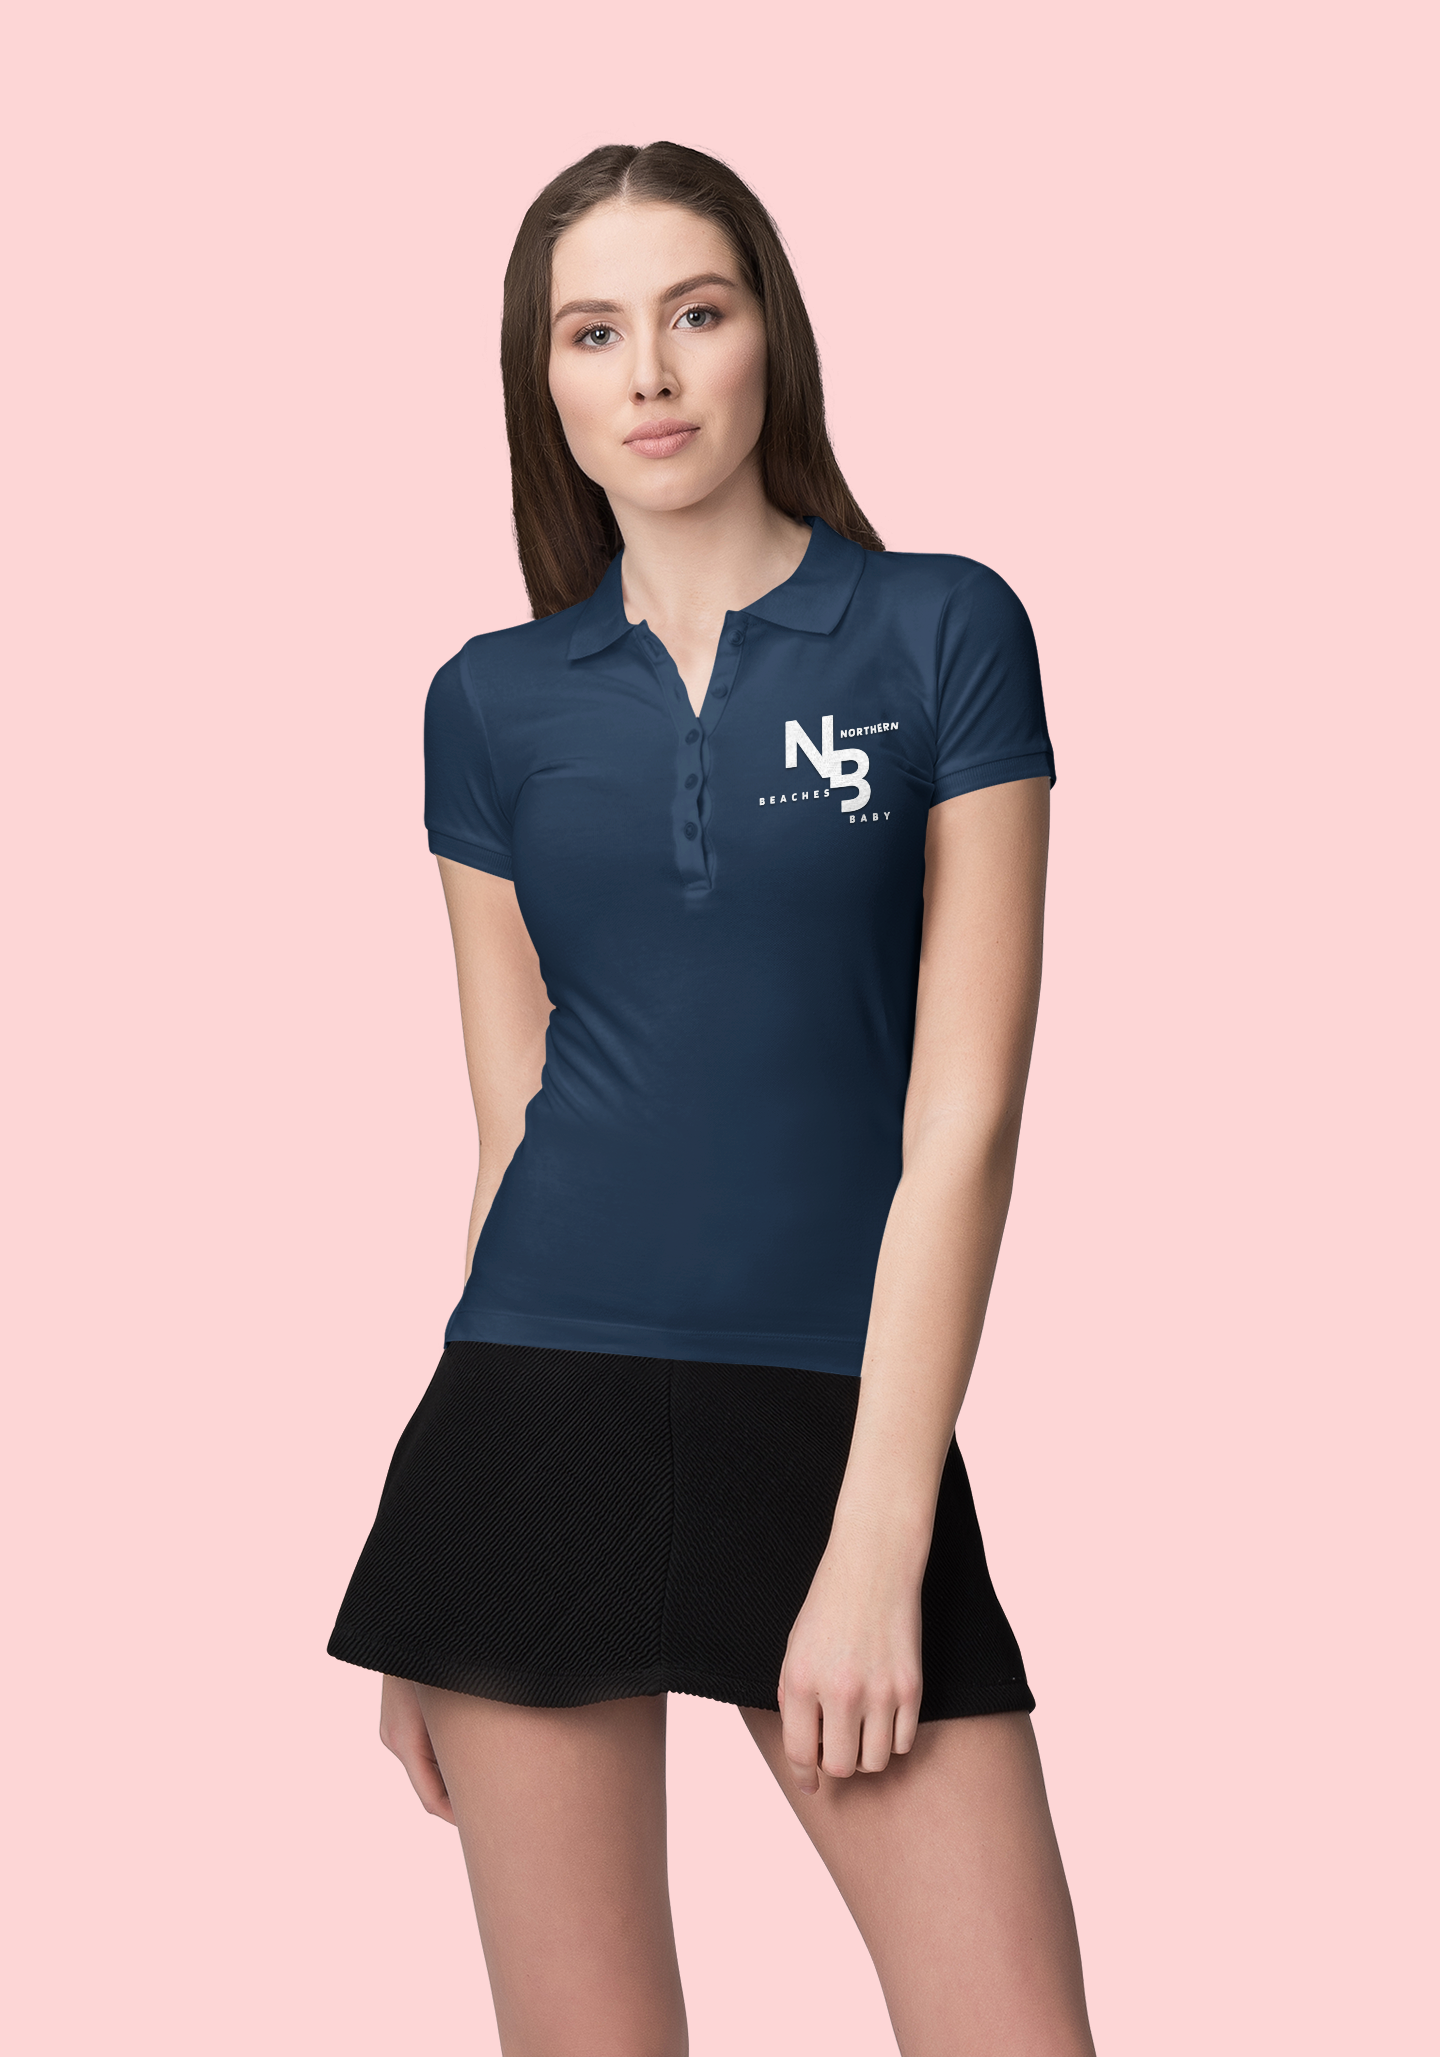 Cotton Polo Shirts Northern Beaches logos SALE ON NOW! Reduced to $35 until sold out!